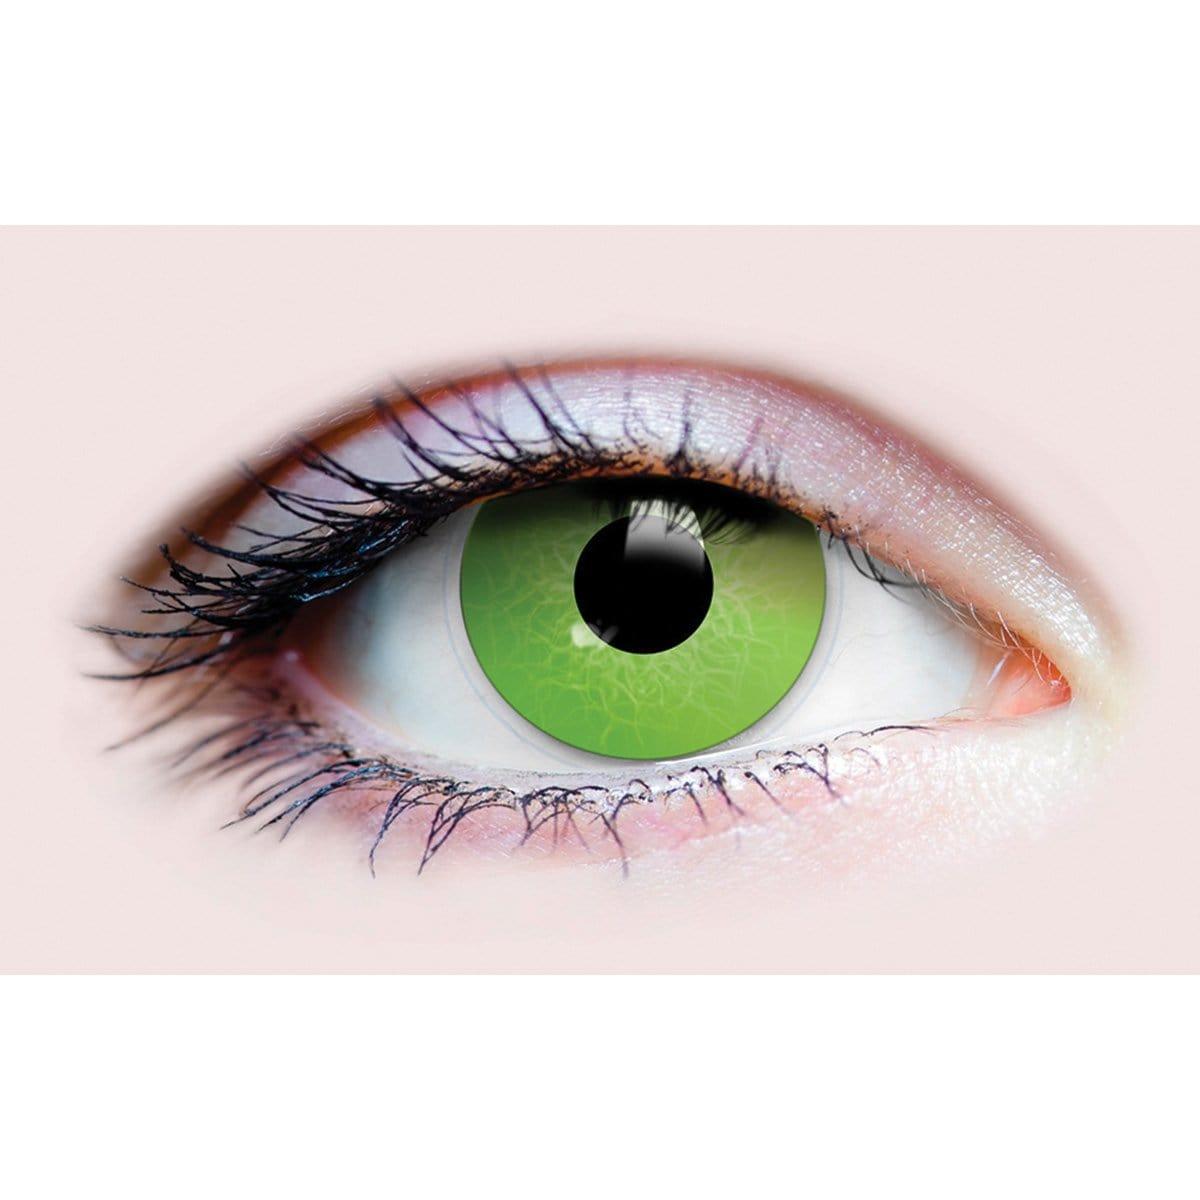 Buy Costume Accessories Hulk contact lenses, 3 months usage sold at Party Expert